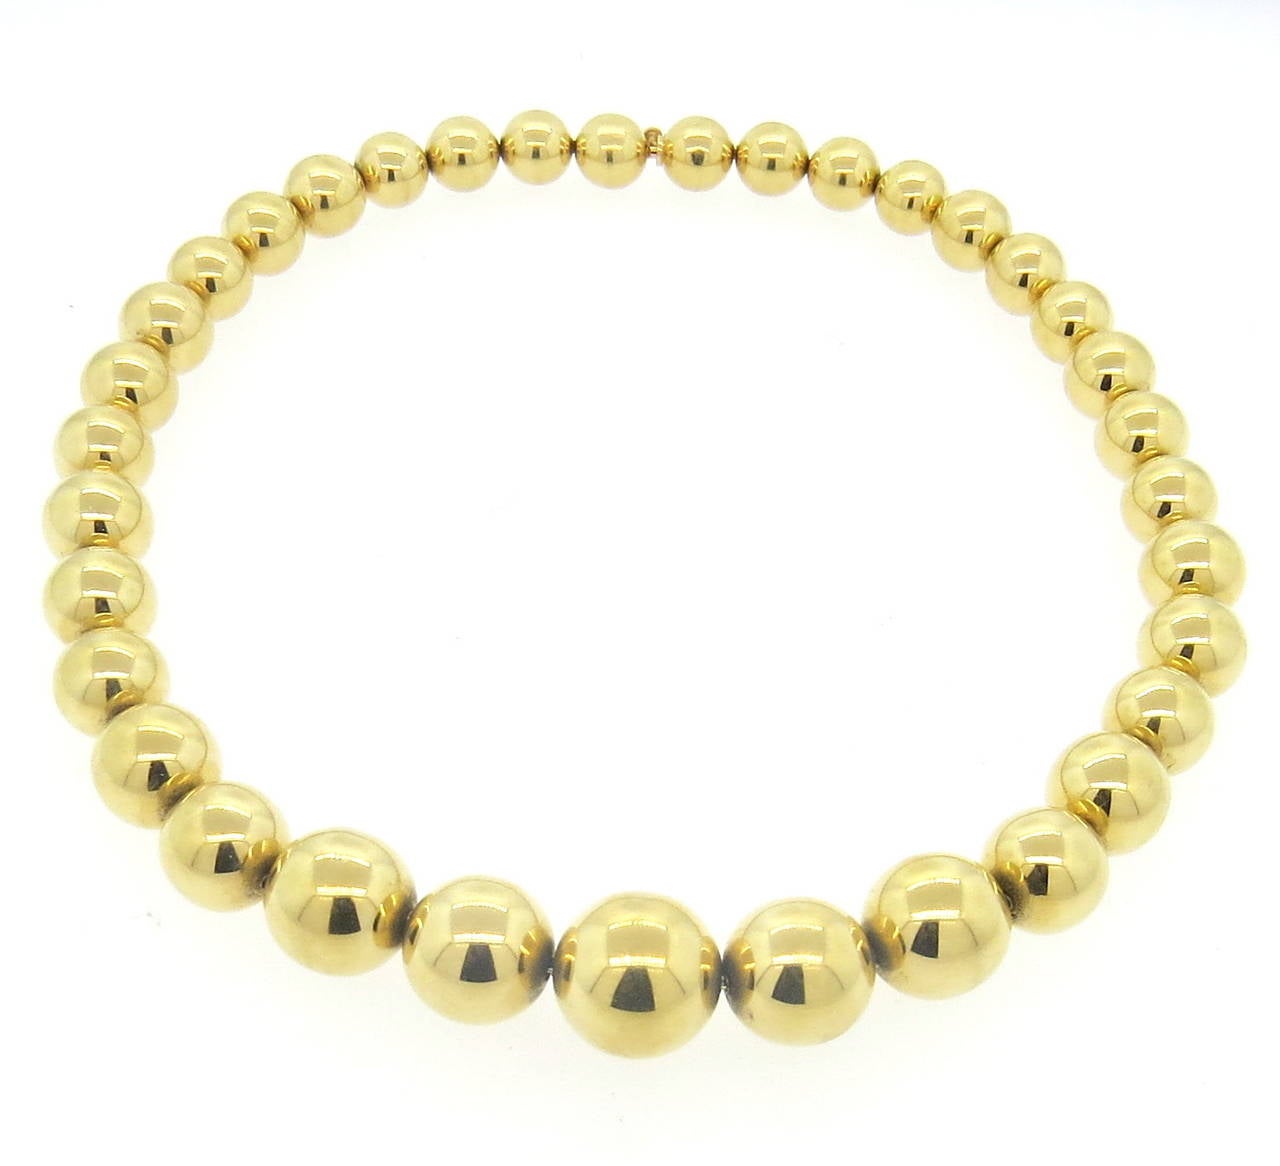 A 14k yellow gold antique necklace comprised of gold ball beads ranging in size from 9.5mm to 16.8mm in diameter.  The necklace measures 16